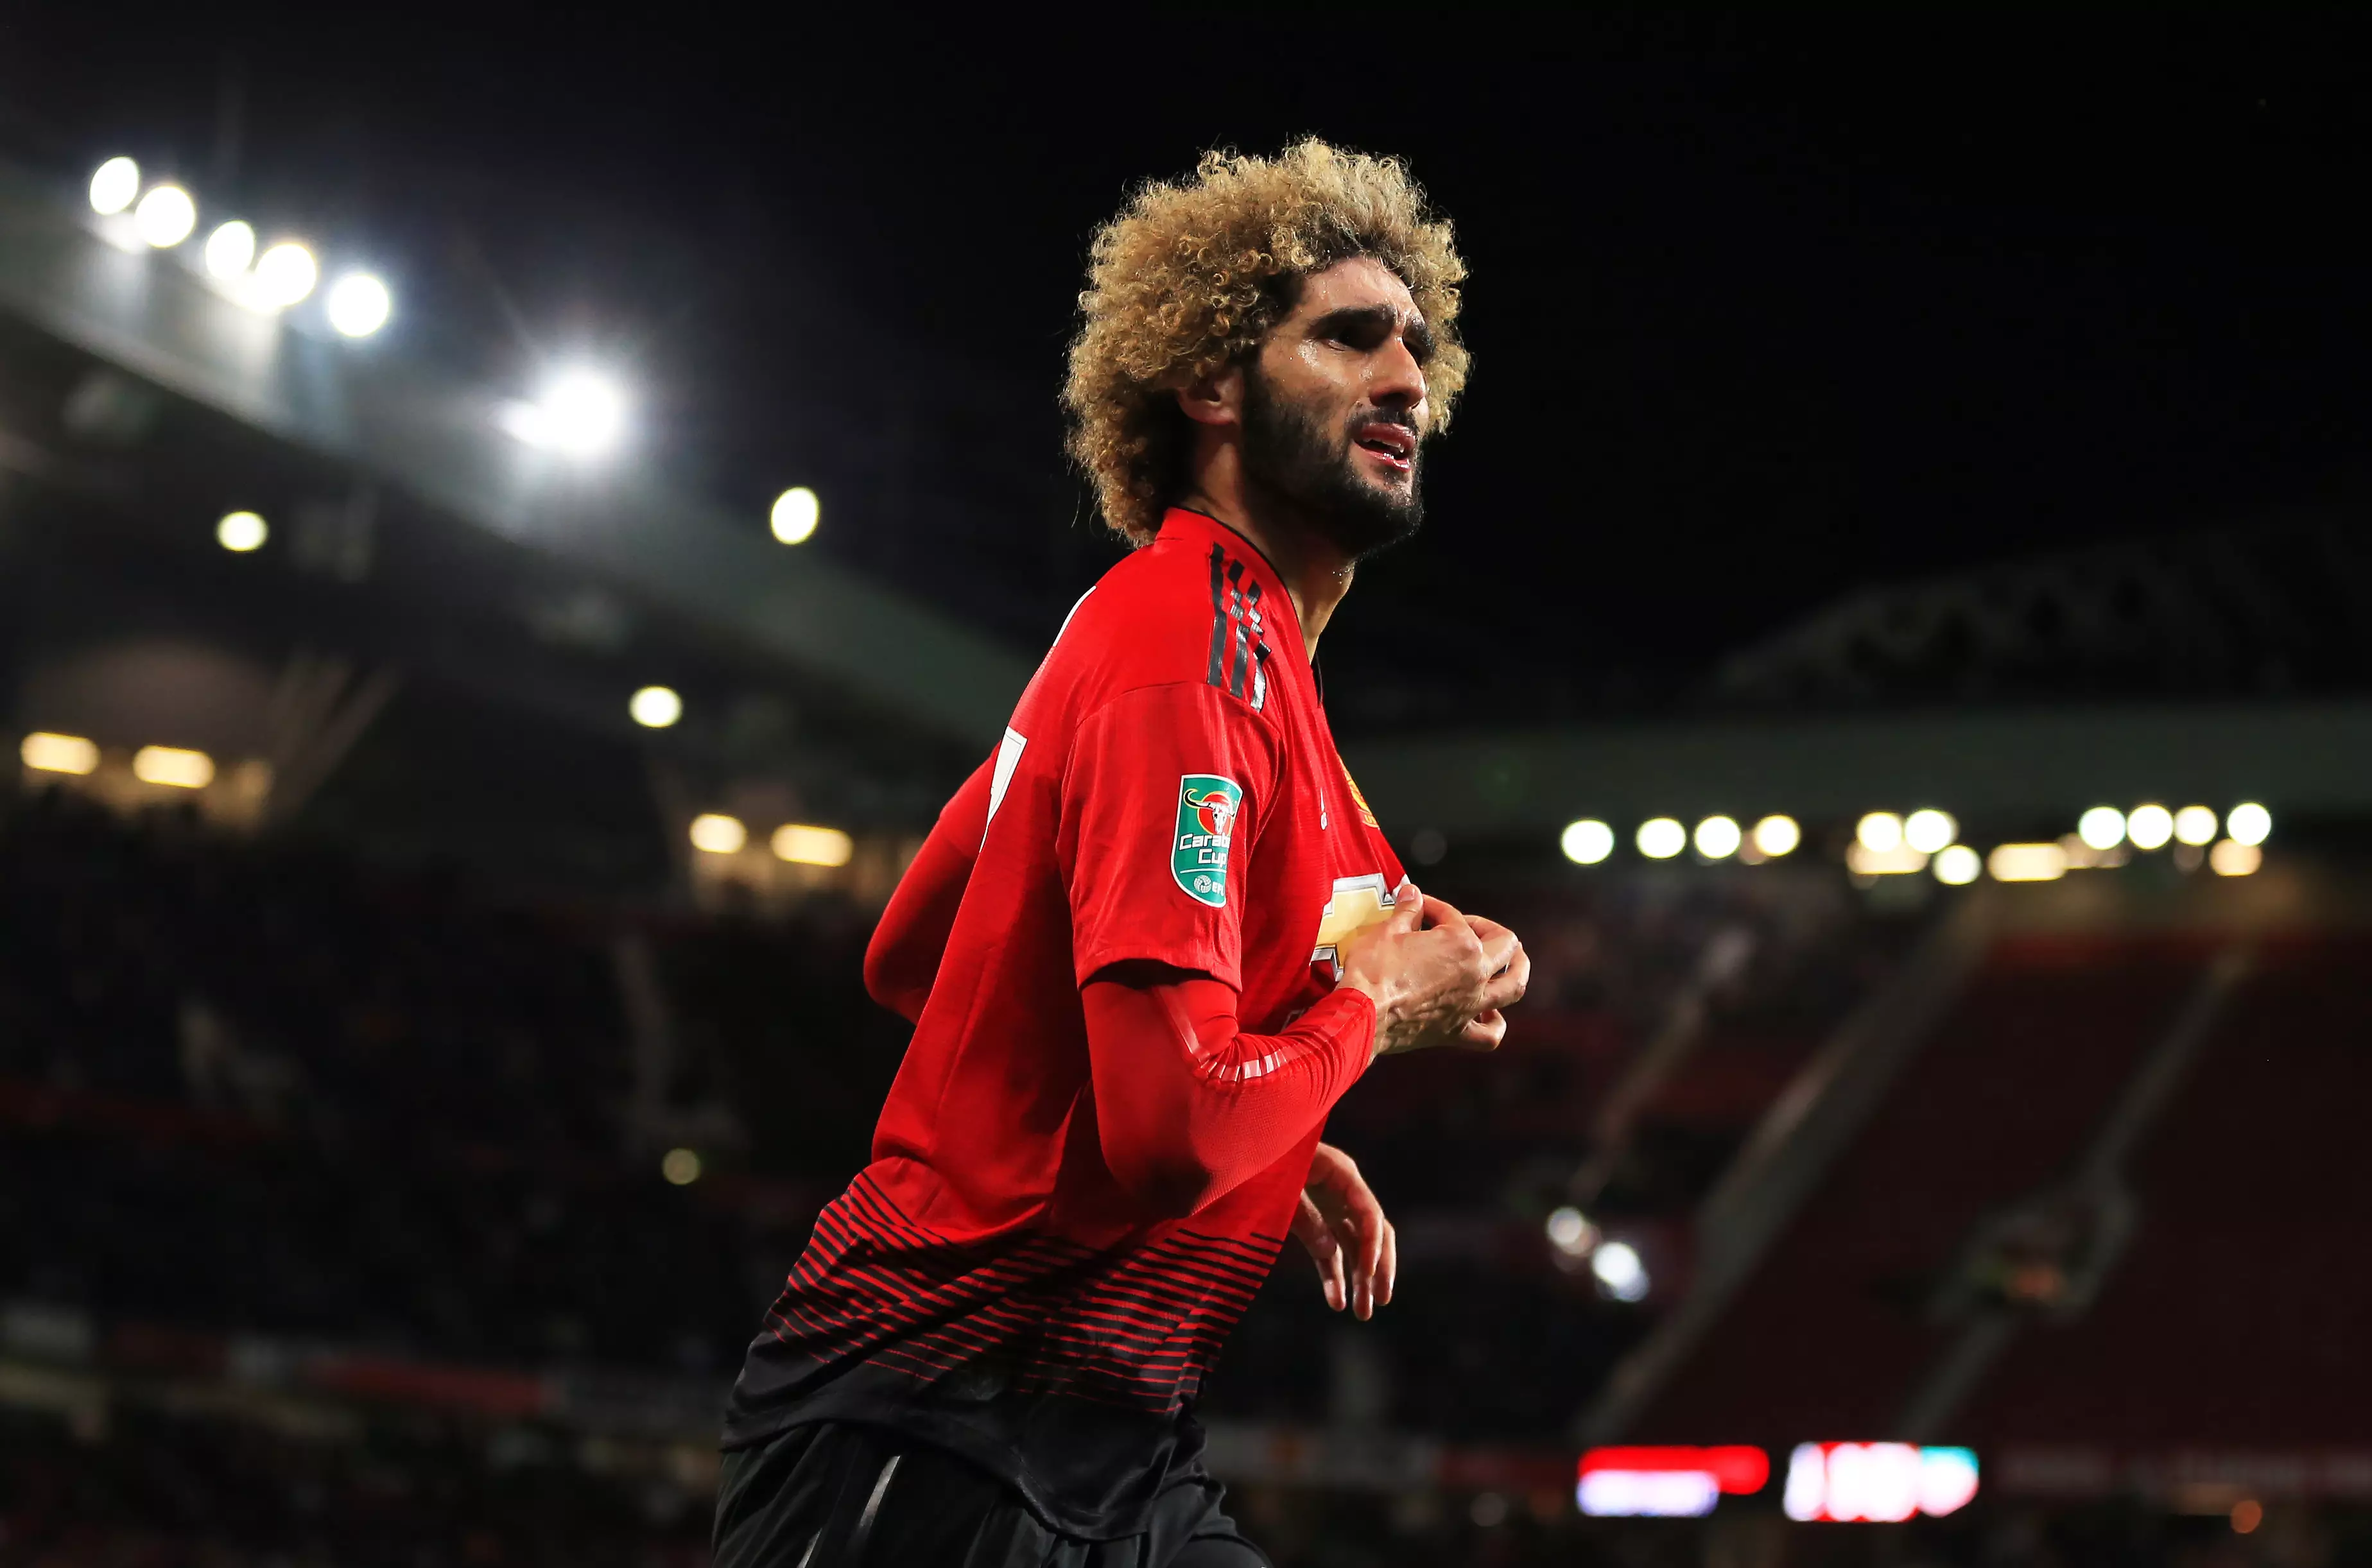 Fellaini remains an integral part of United's team. Image: PA Images